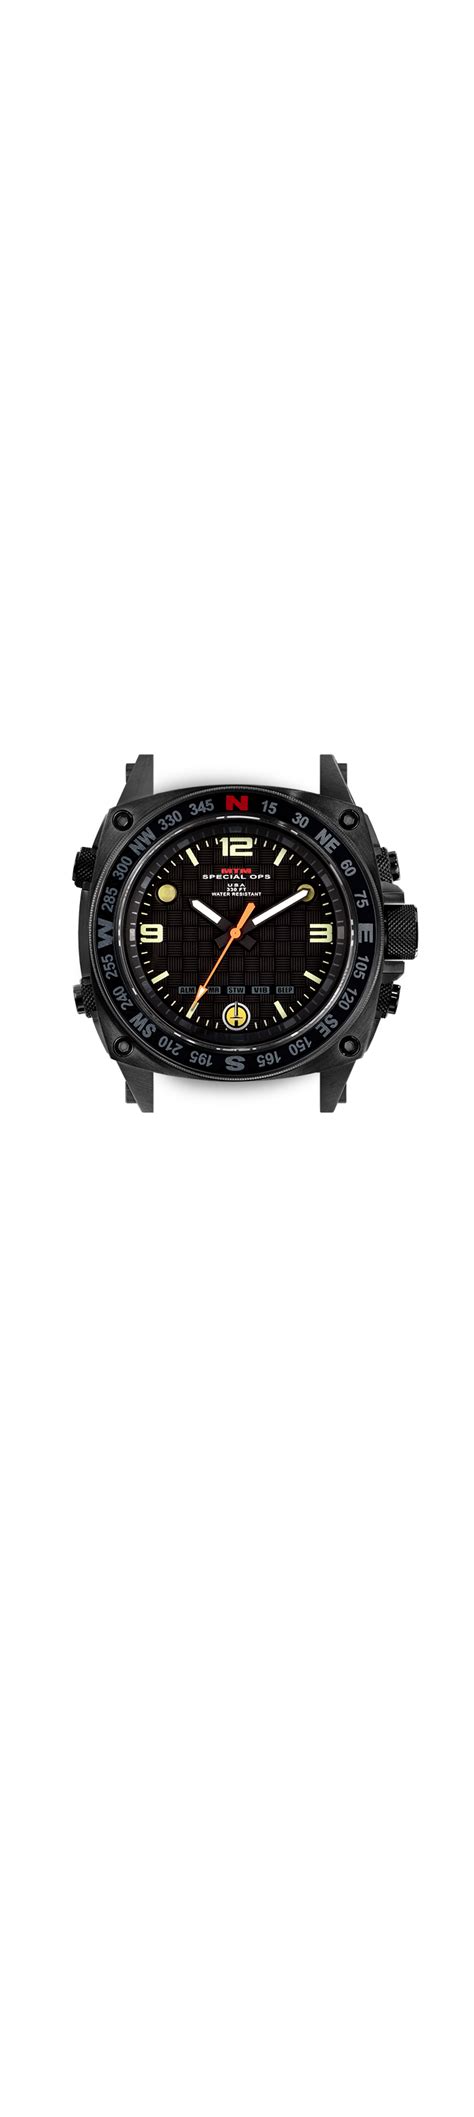 Black Yellow Silencer | Special Ops Watches | MTM | WATCH | Mtm special ops, Silencers, Special ops